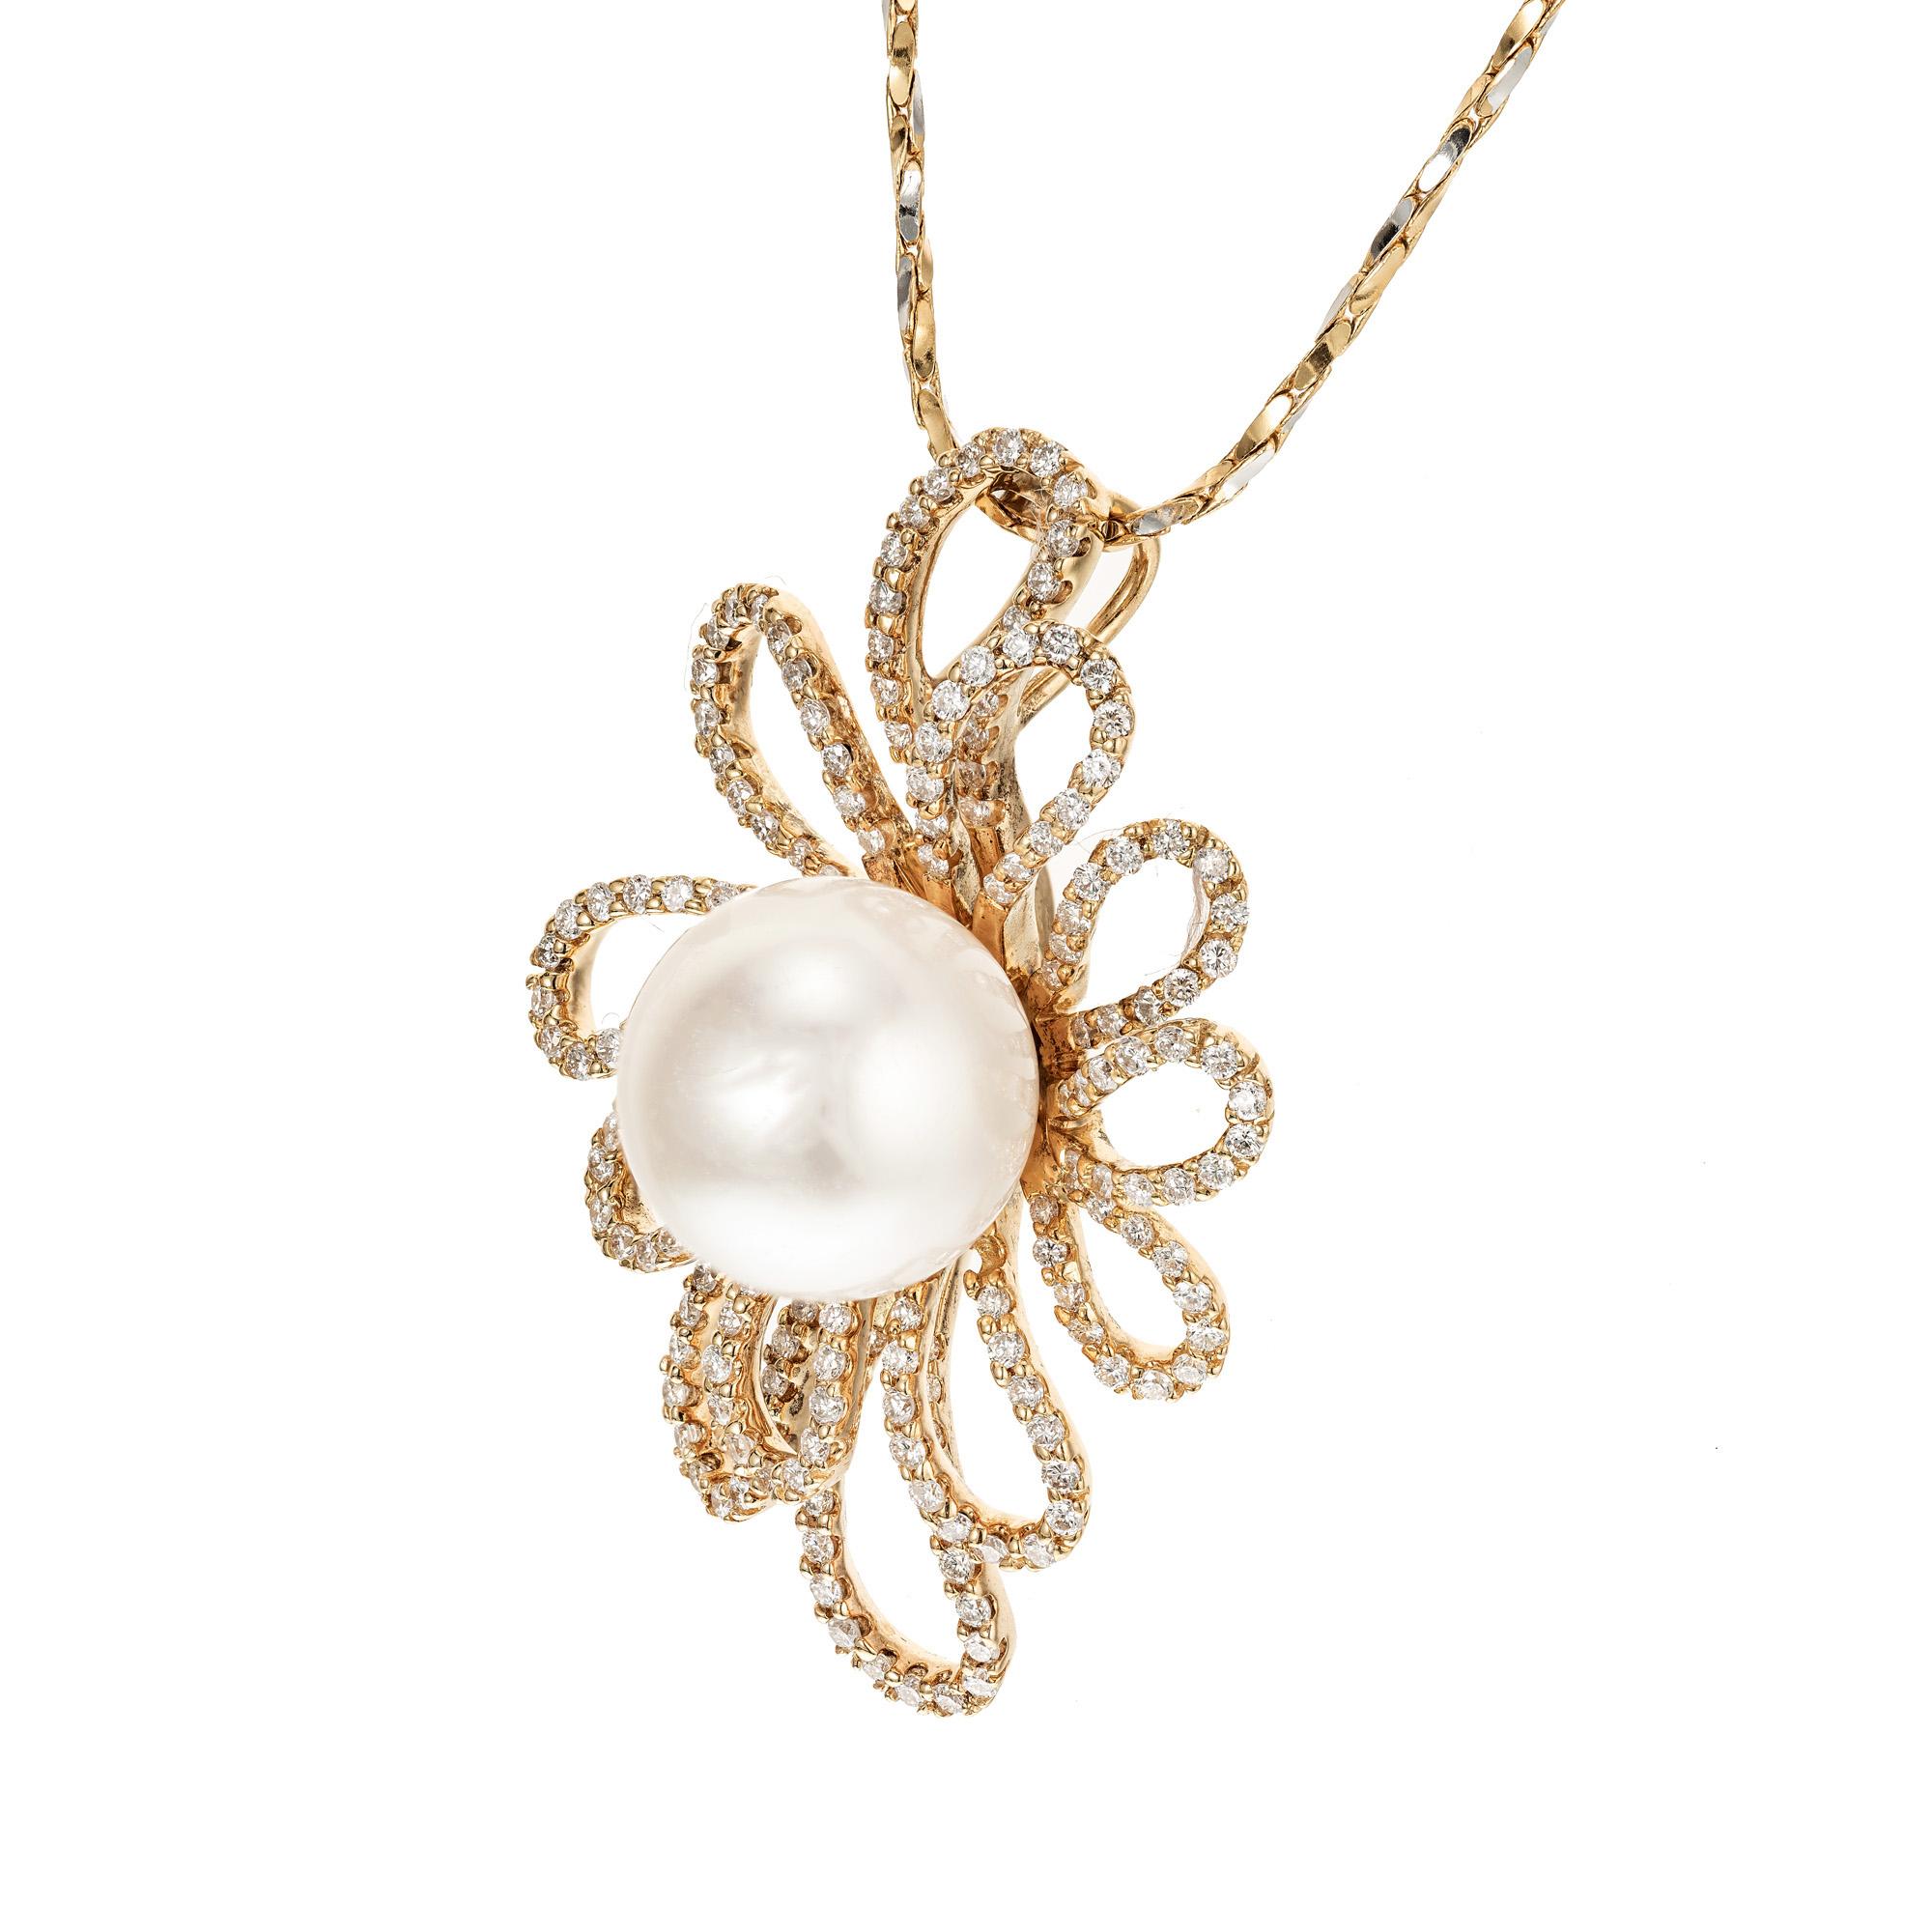 Diamond and pearl pendant necklace. 12.27mm center South Sea cultured pearl with a halo of 18k yellow gold diamond loops. 18 inch 18k yellow gold chain.

12.27mm South Sea cultured pearl AA grade, white with excellent lustre. 
Approx. 175 full cut